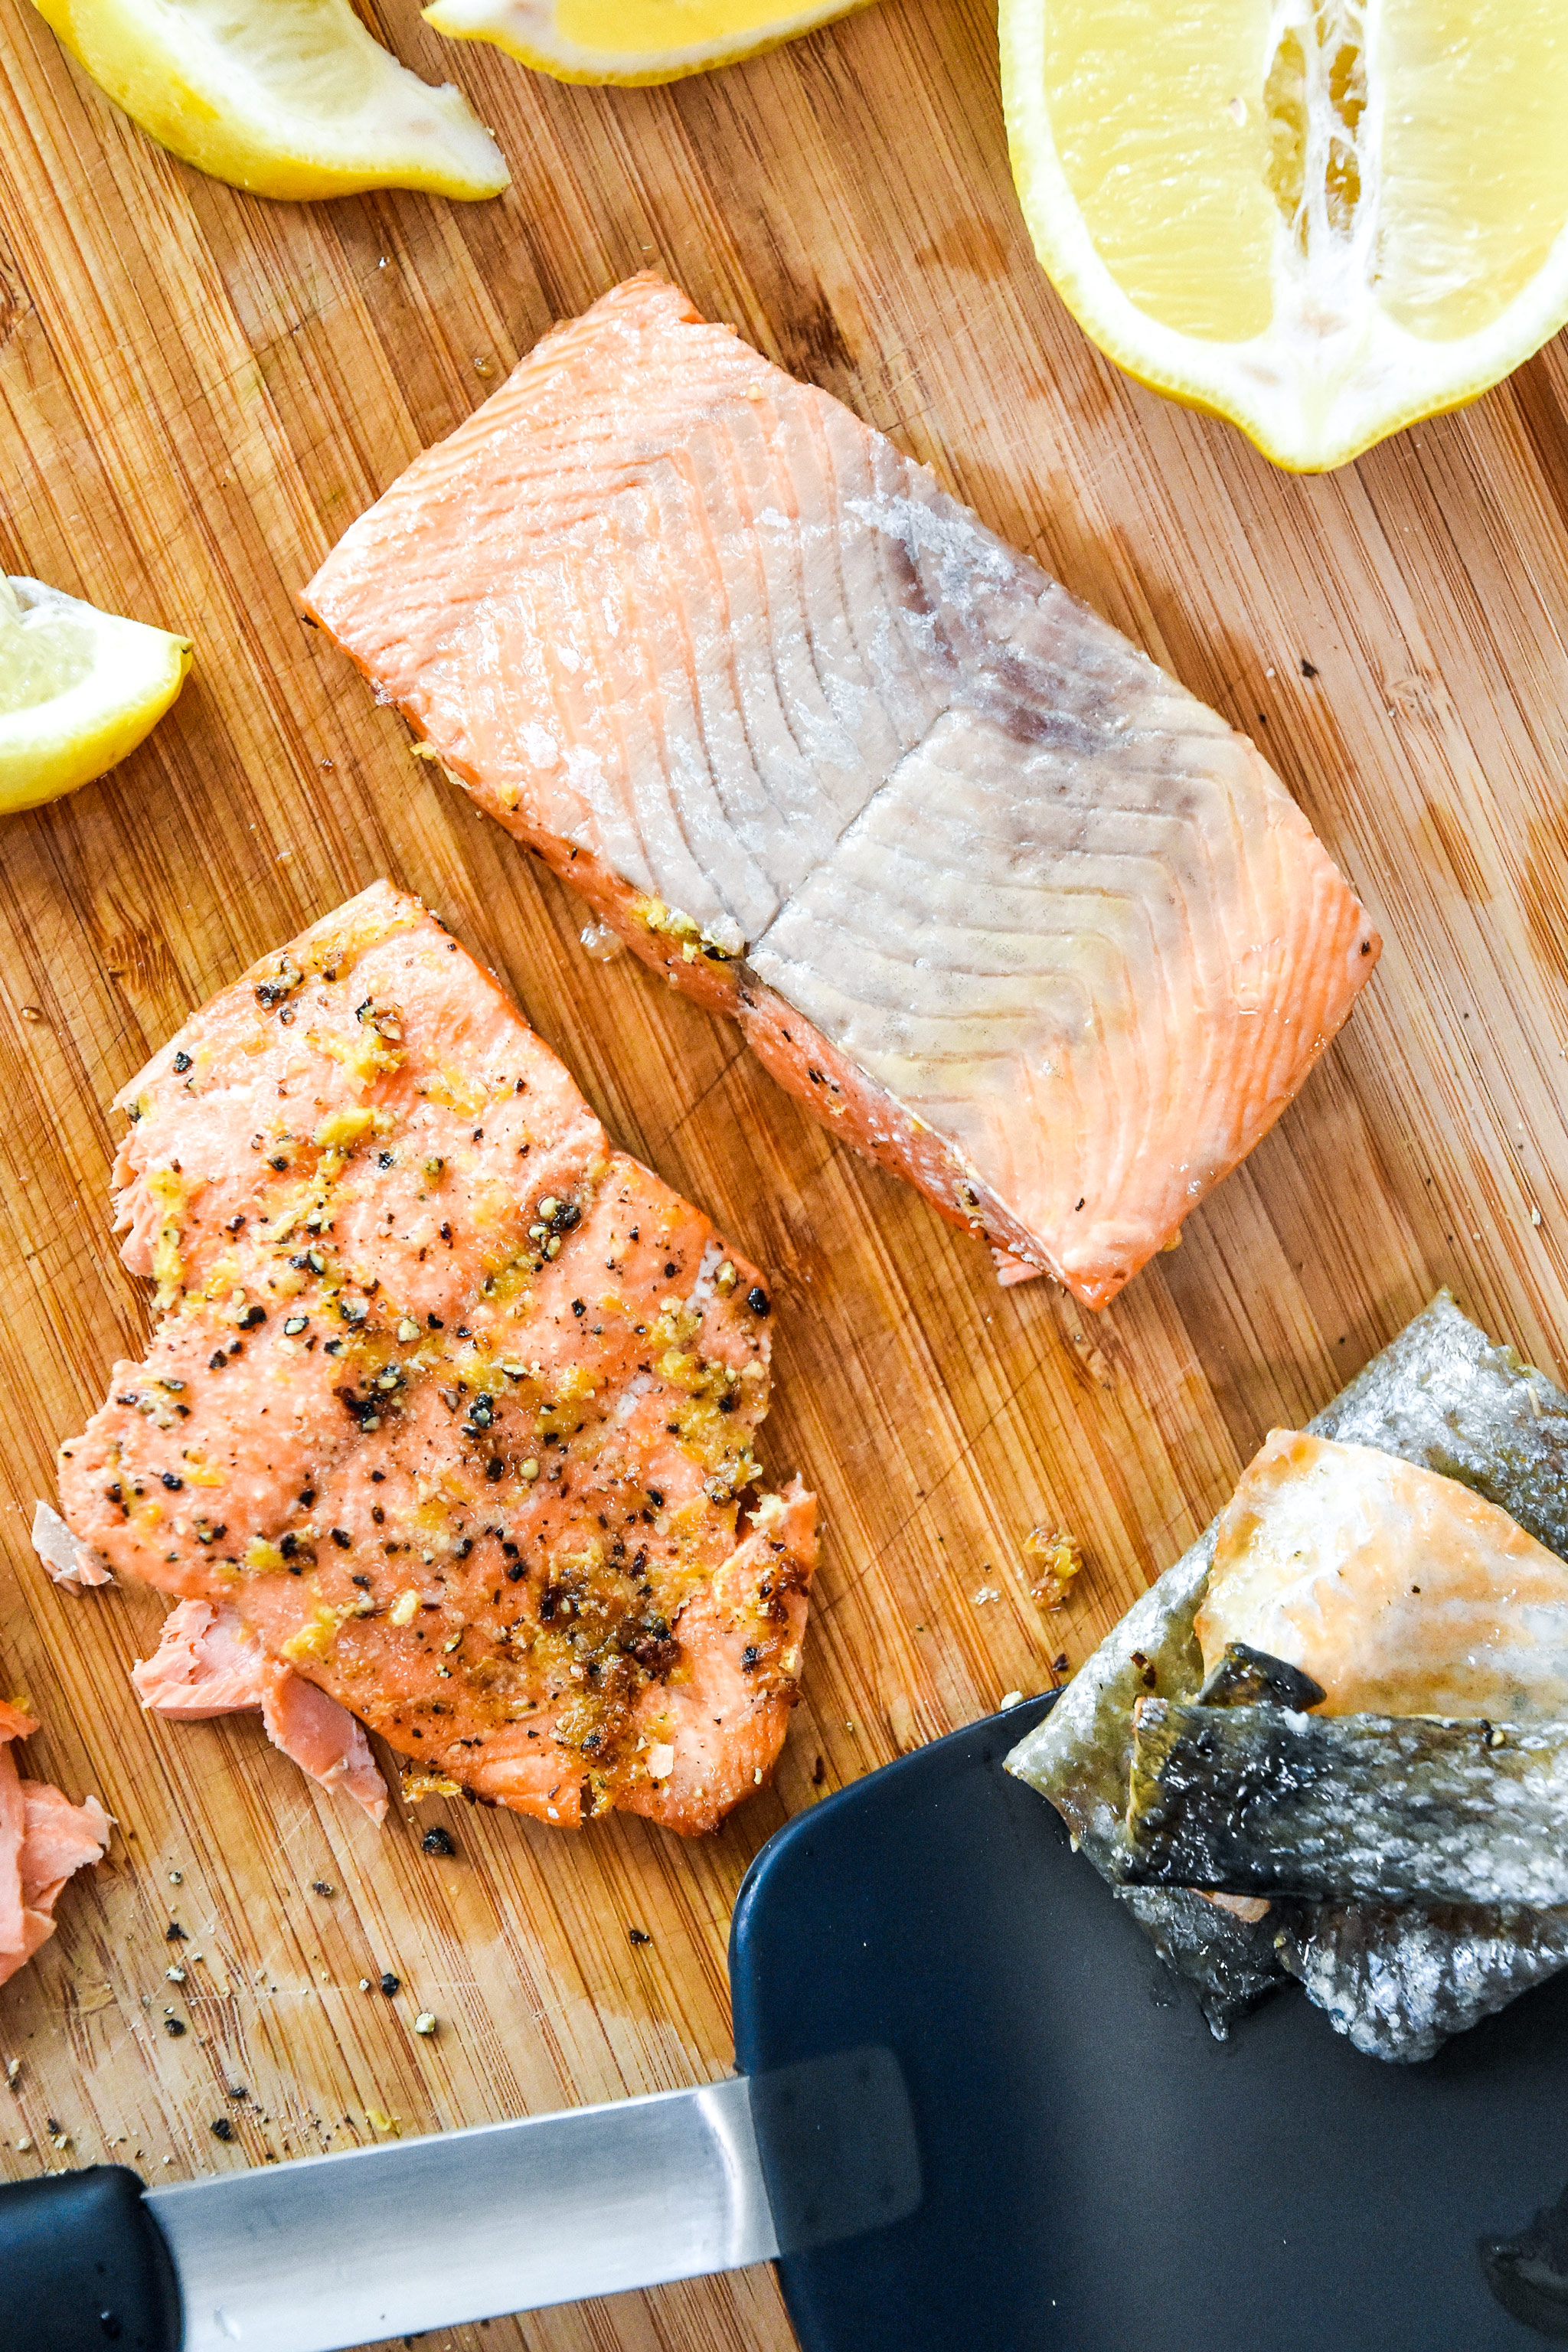 easily remove the skin from the cooked air fryer lemon pepper salmon.